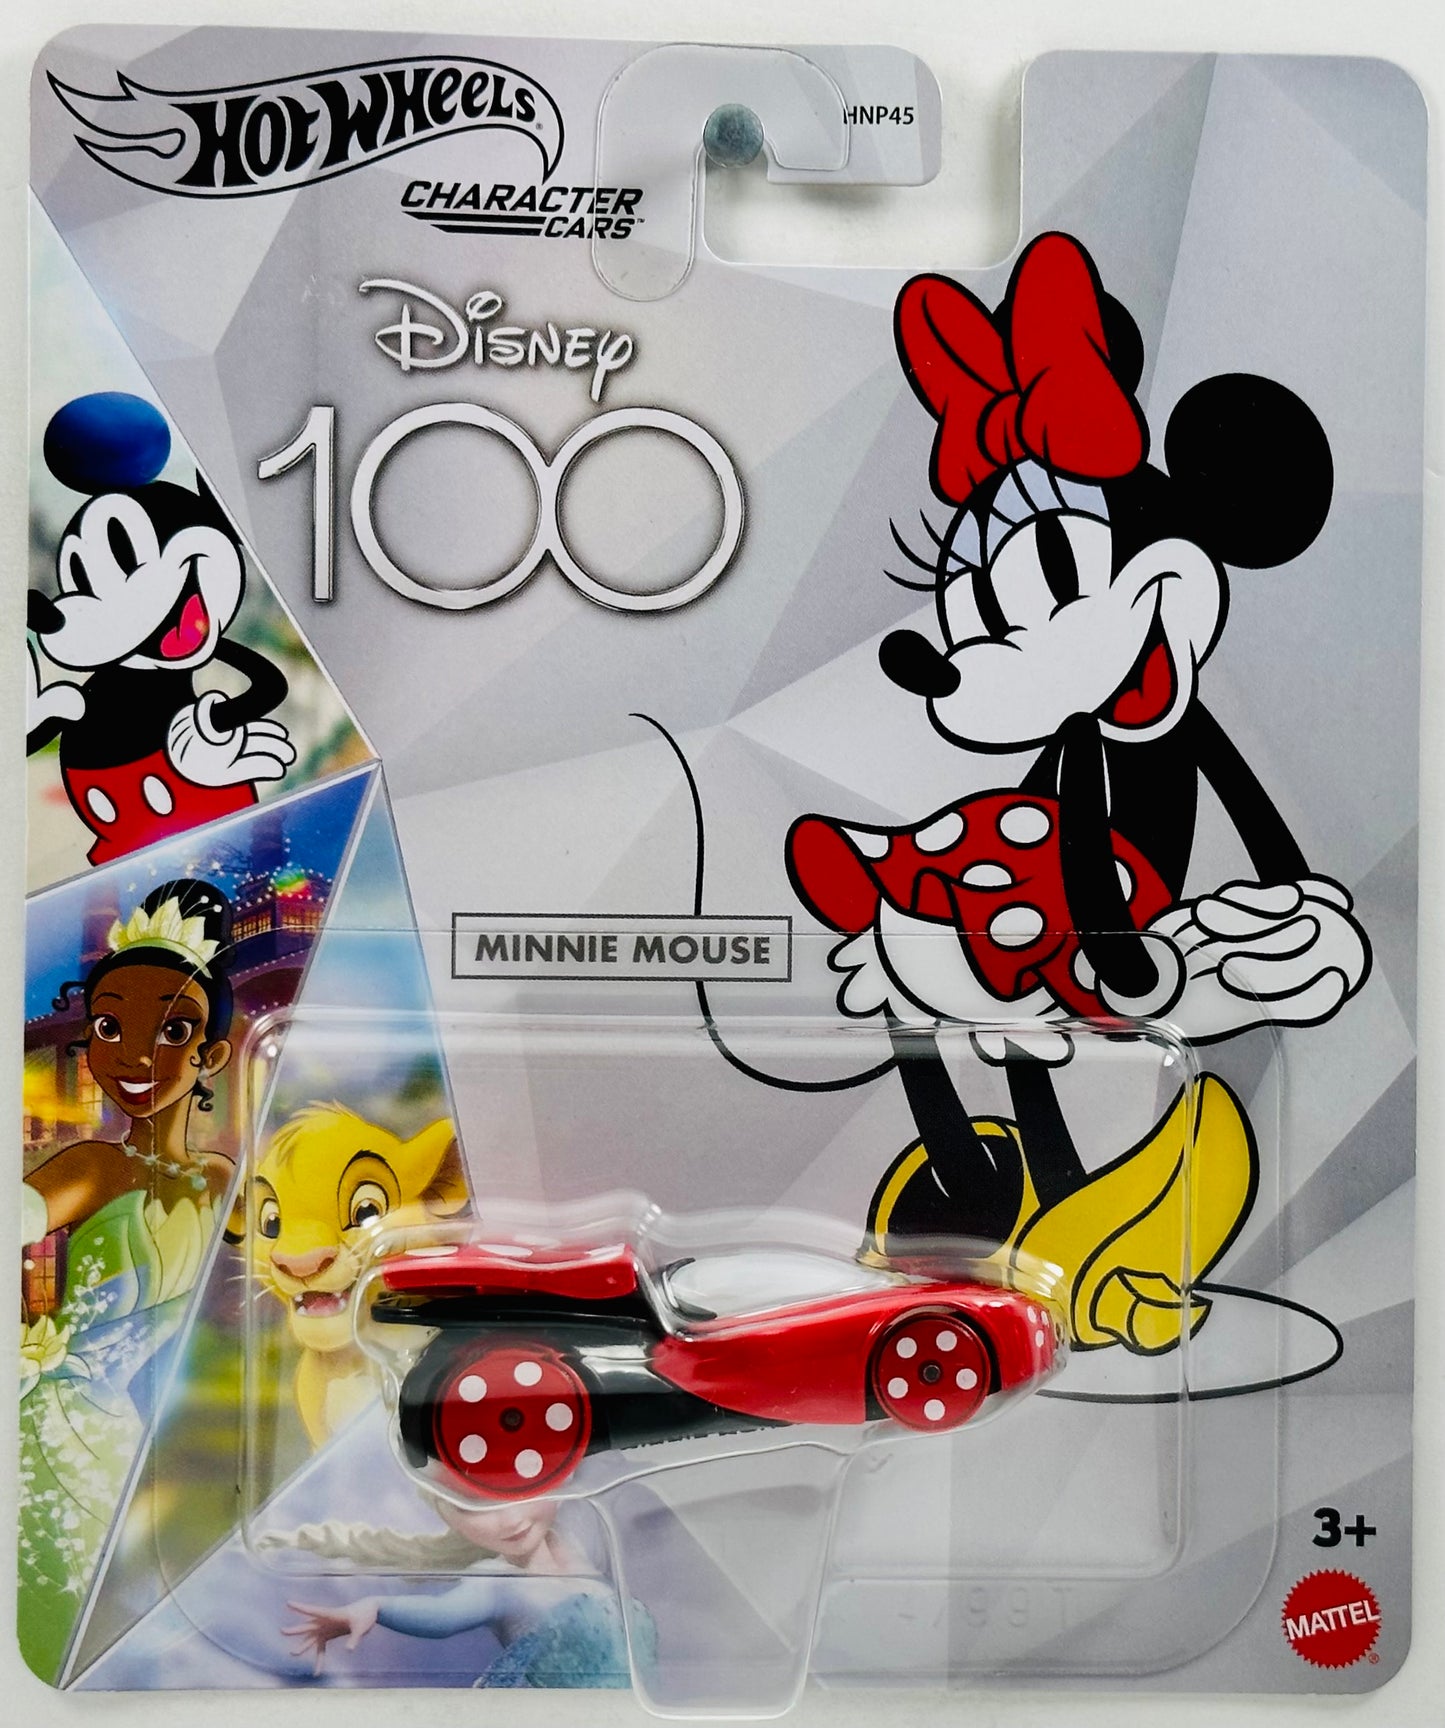 Hot Wheels 2023 - Character Cars / Disney 100 / Mickey and Friends - Minnie Mouse - Black & Red